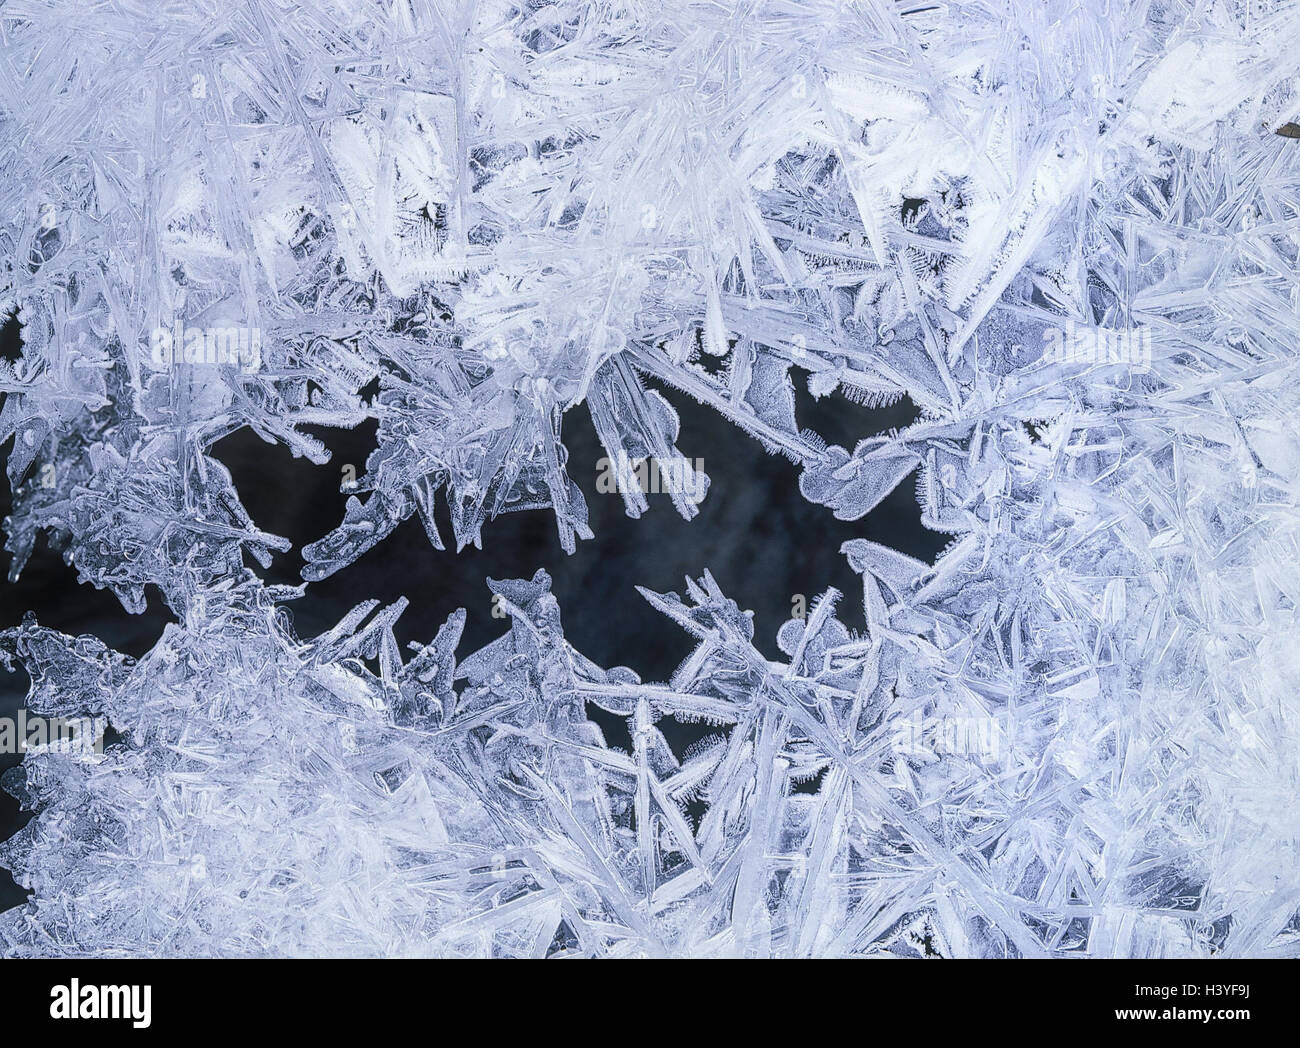 Brook, freezes over, ice-crystals, close up, water, frozen, ice, frost flowers, forms, samples, structure, cold, coldly, nature, spectacle nature, natural phenomenon, Germany, middle town Stock Photo